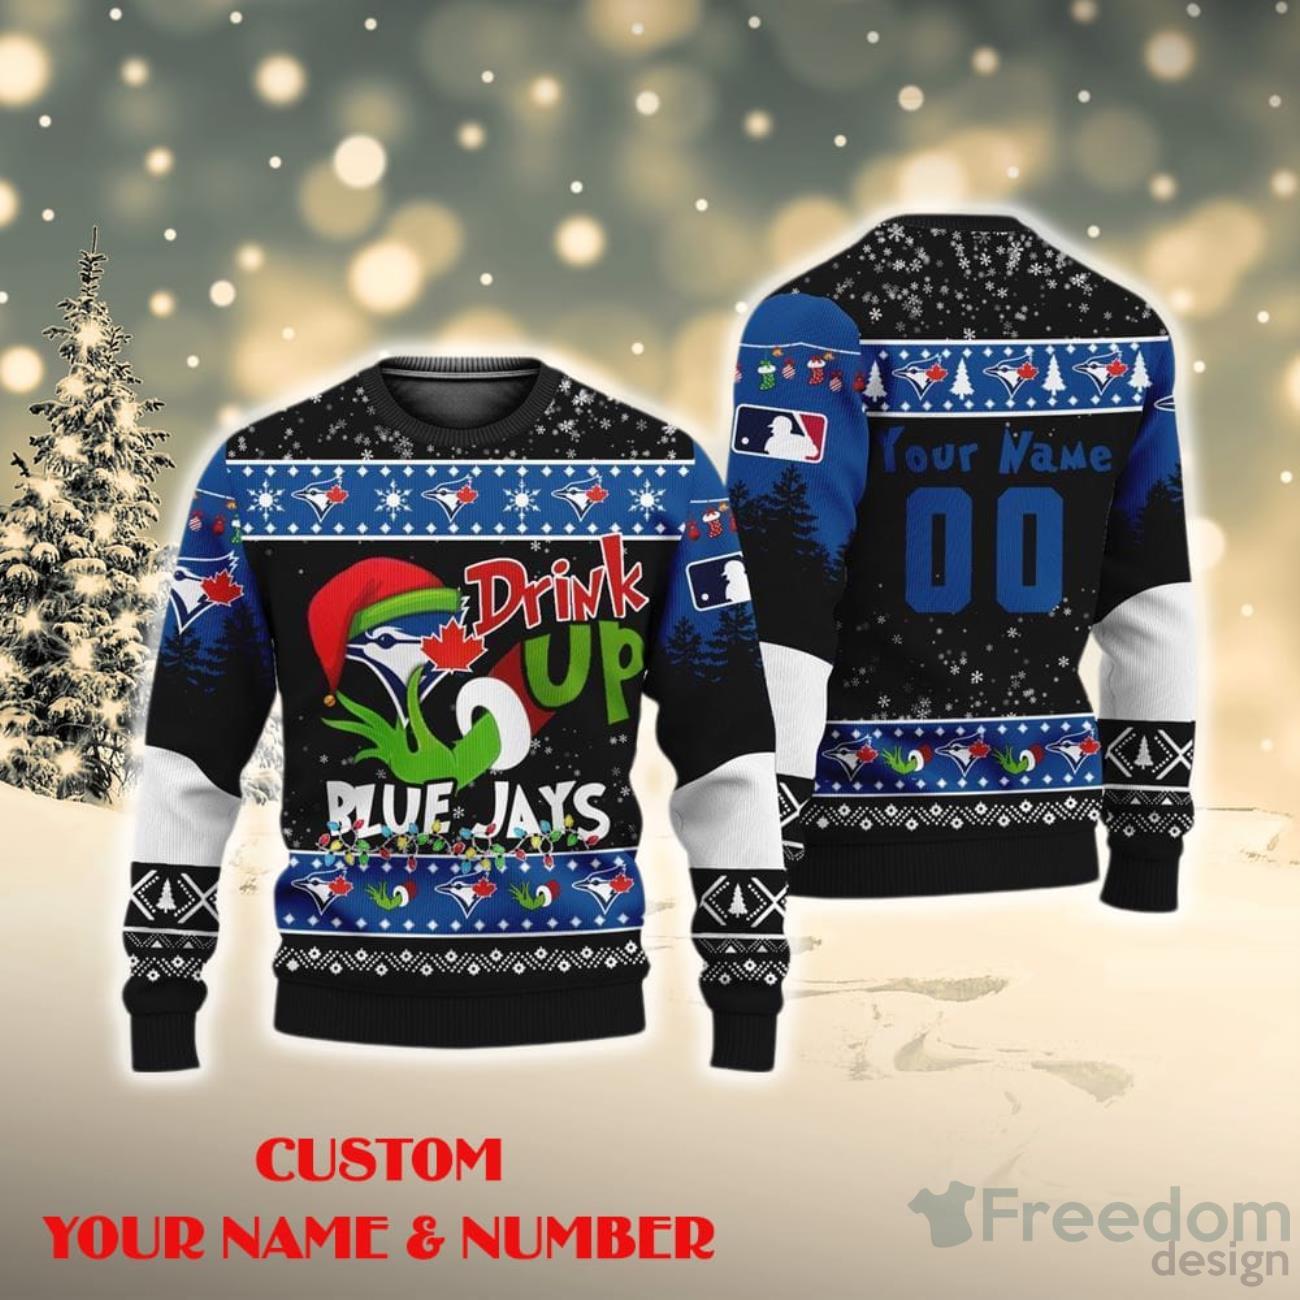 Texas Rangers Grinch Christmas Ugly Sweater - Shibtee Clothing